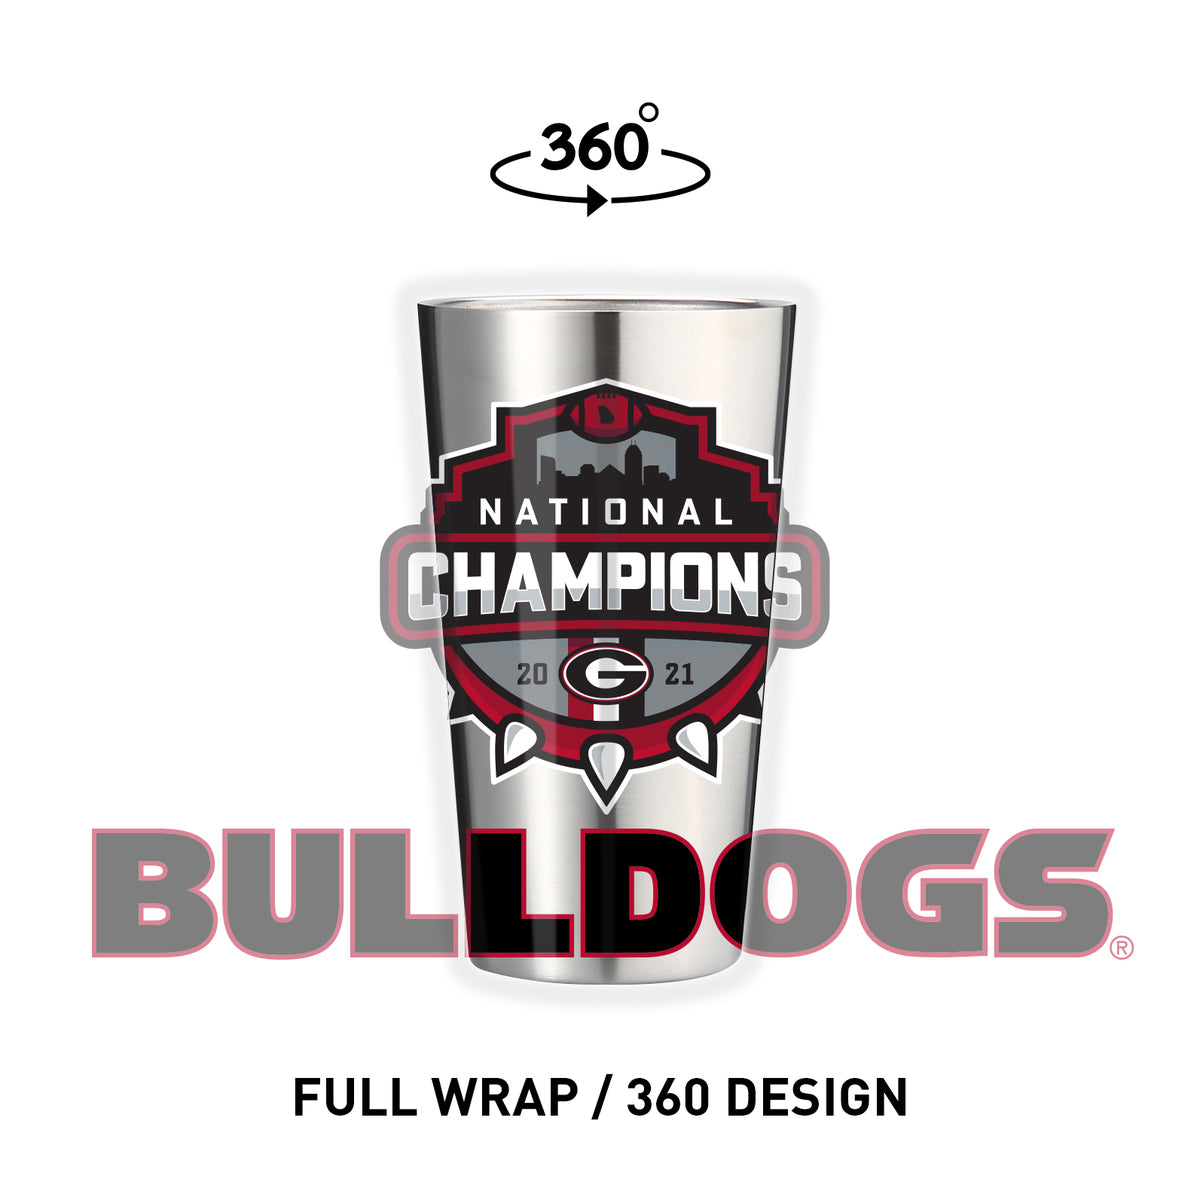 GEORGIA BULLDOGS - 2021 NATIONAL CHAMPIONS - Logo Concept by